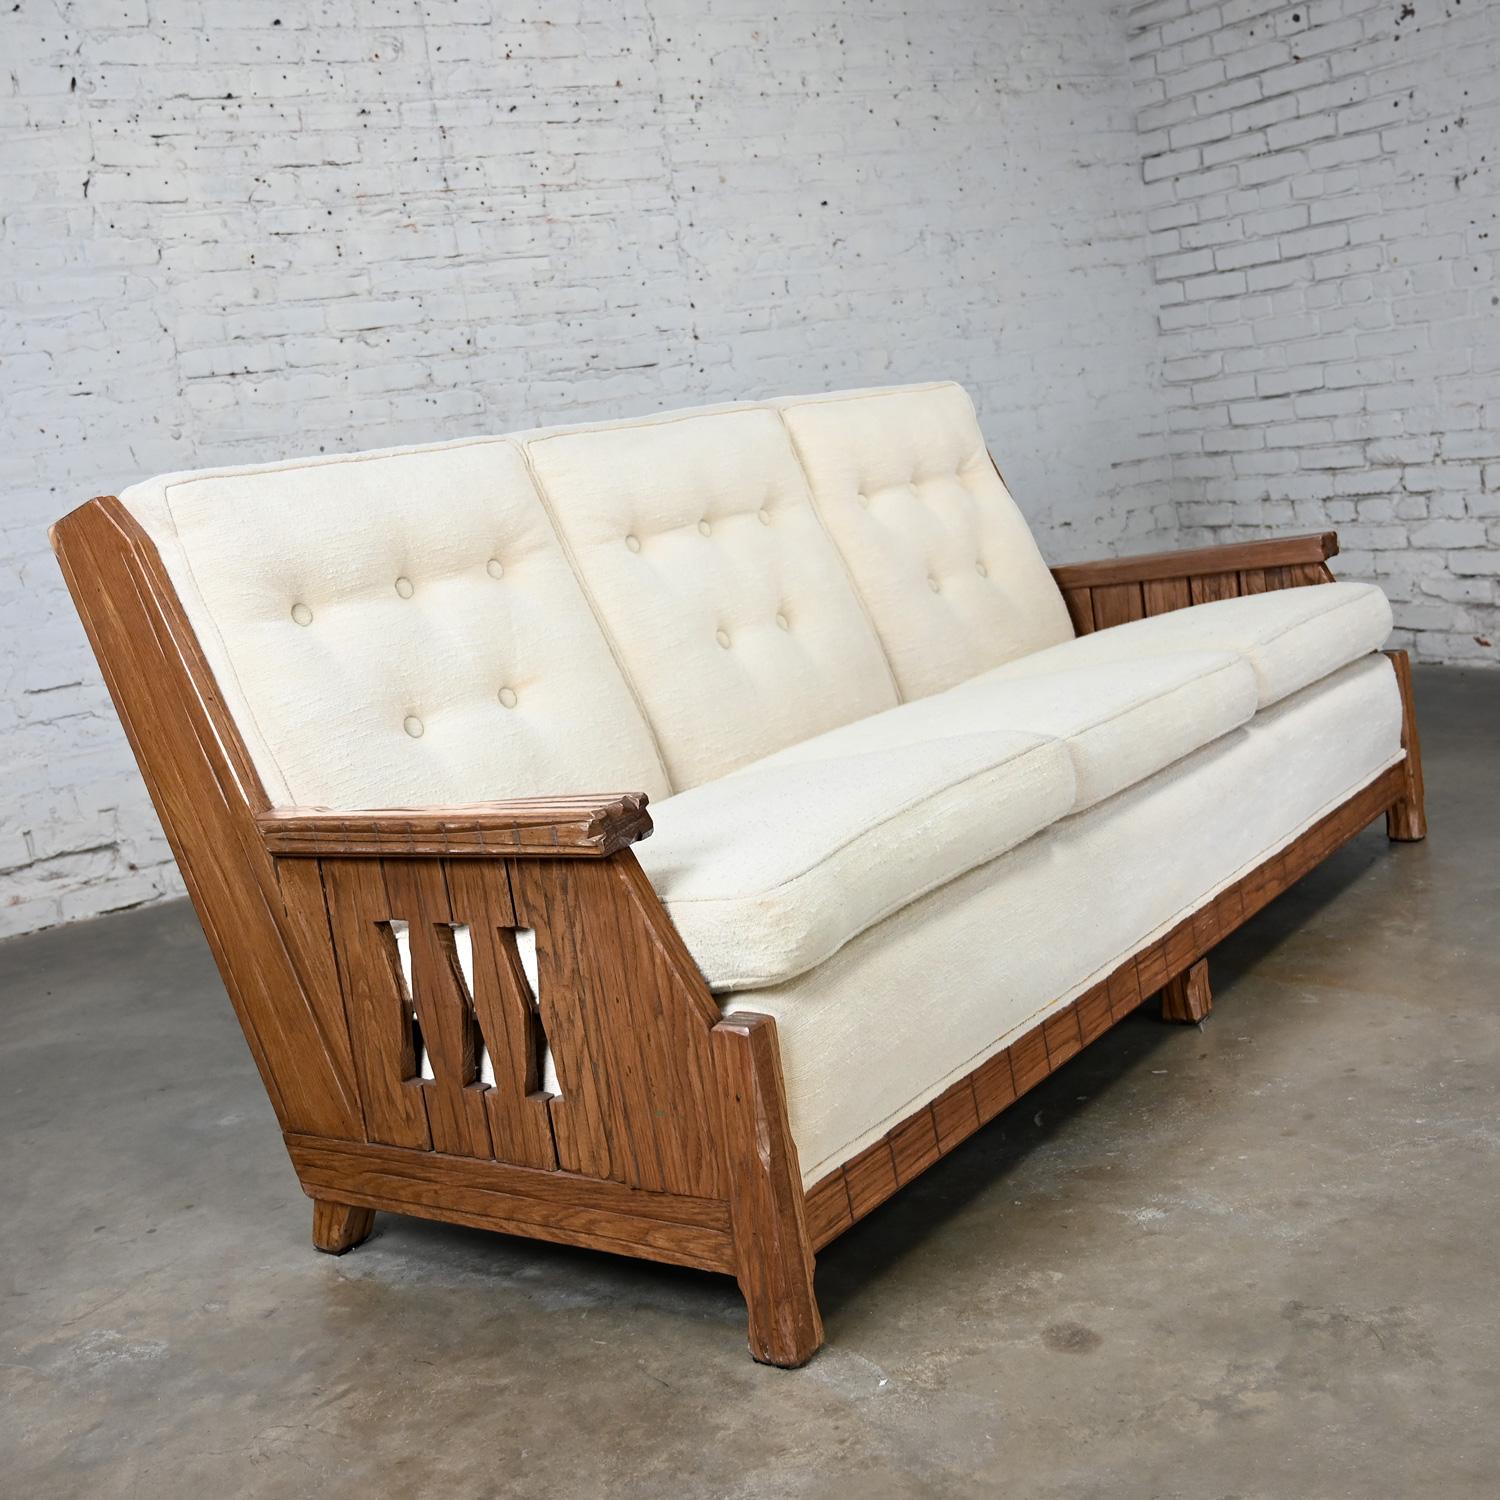 Gorgeous vintage rustic or Western style sofa attributed to A. Brandt Ranch Oak comprised of a medium or honey toned Ranch Oak finished frame & reupholstered in a white vanilla toned nubby linen-like fabric with button detail on the back cushions.